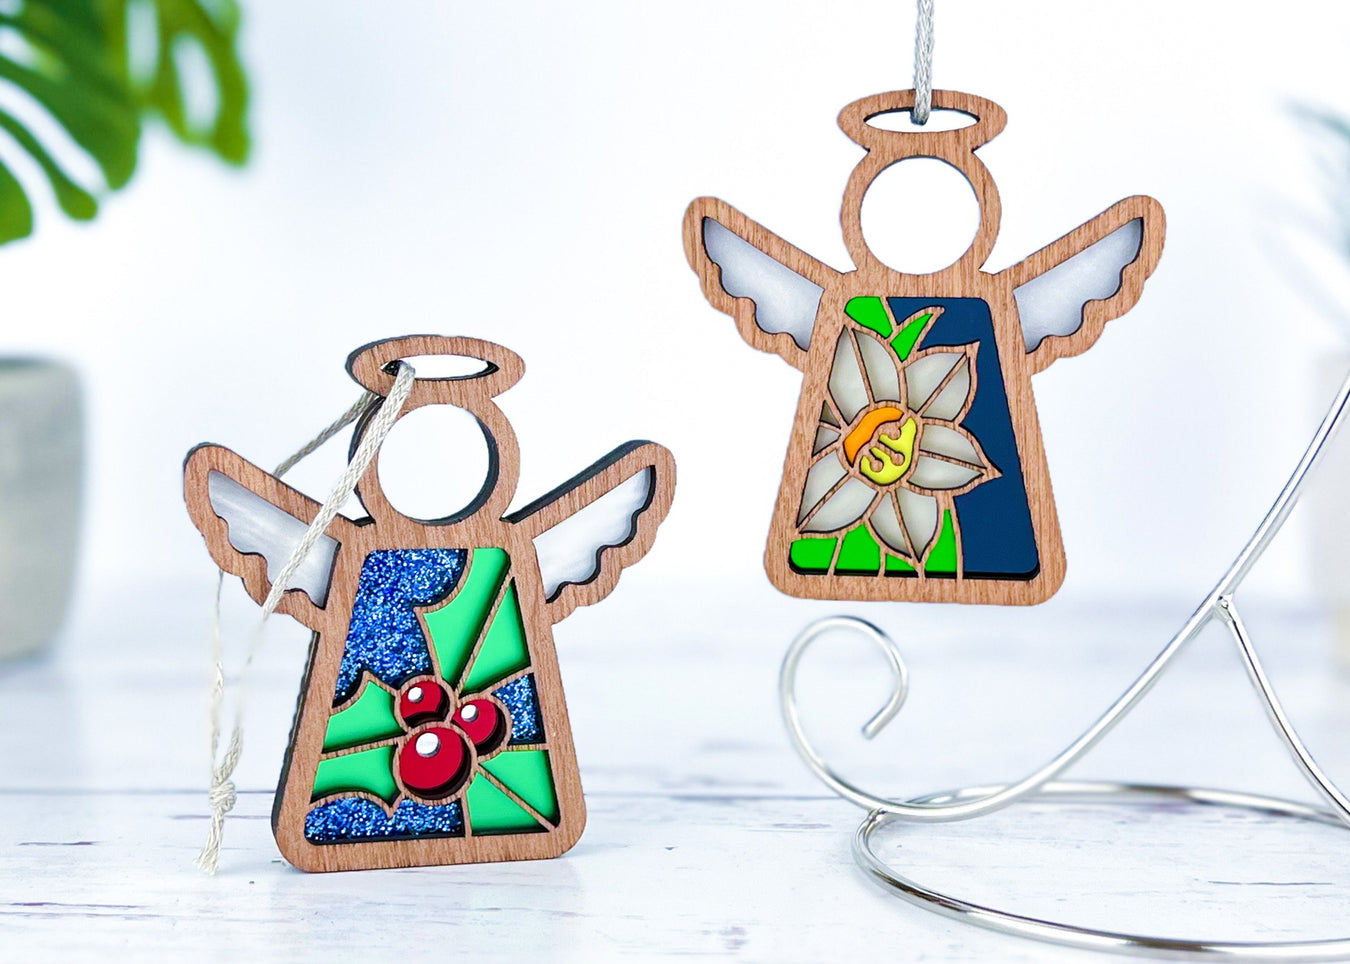 Angel ornaments featuring December birth month flowers, ideal birthday gift ideas for a wife, best friend or special women, showcasing vibrant holly and narcissus birth flowers in a stained glass inspired style.